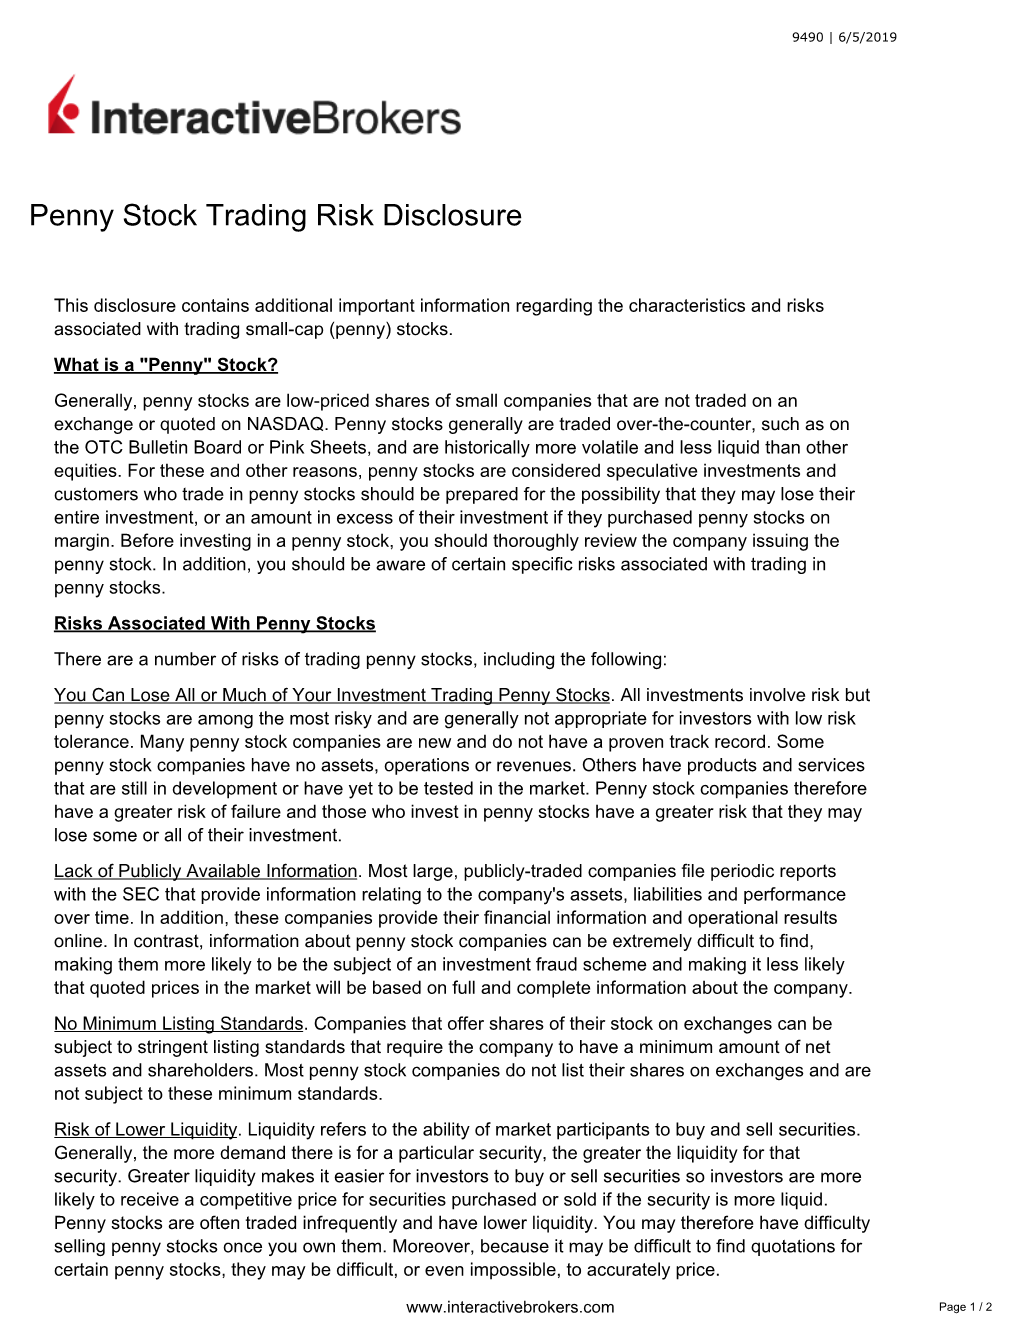 Penny Stock Trading Risk Disclosure